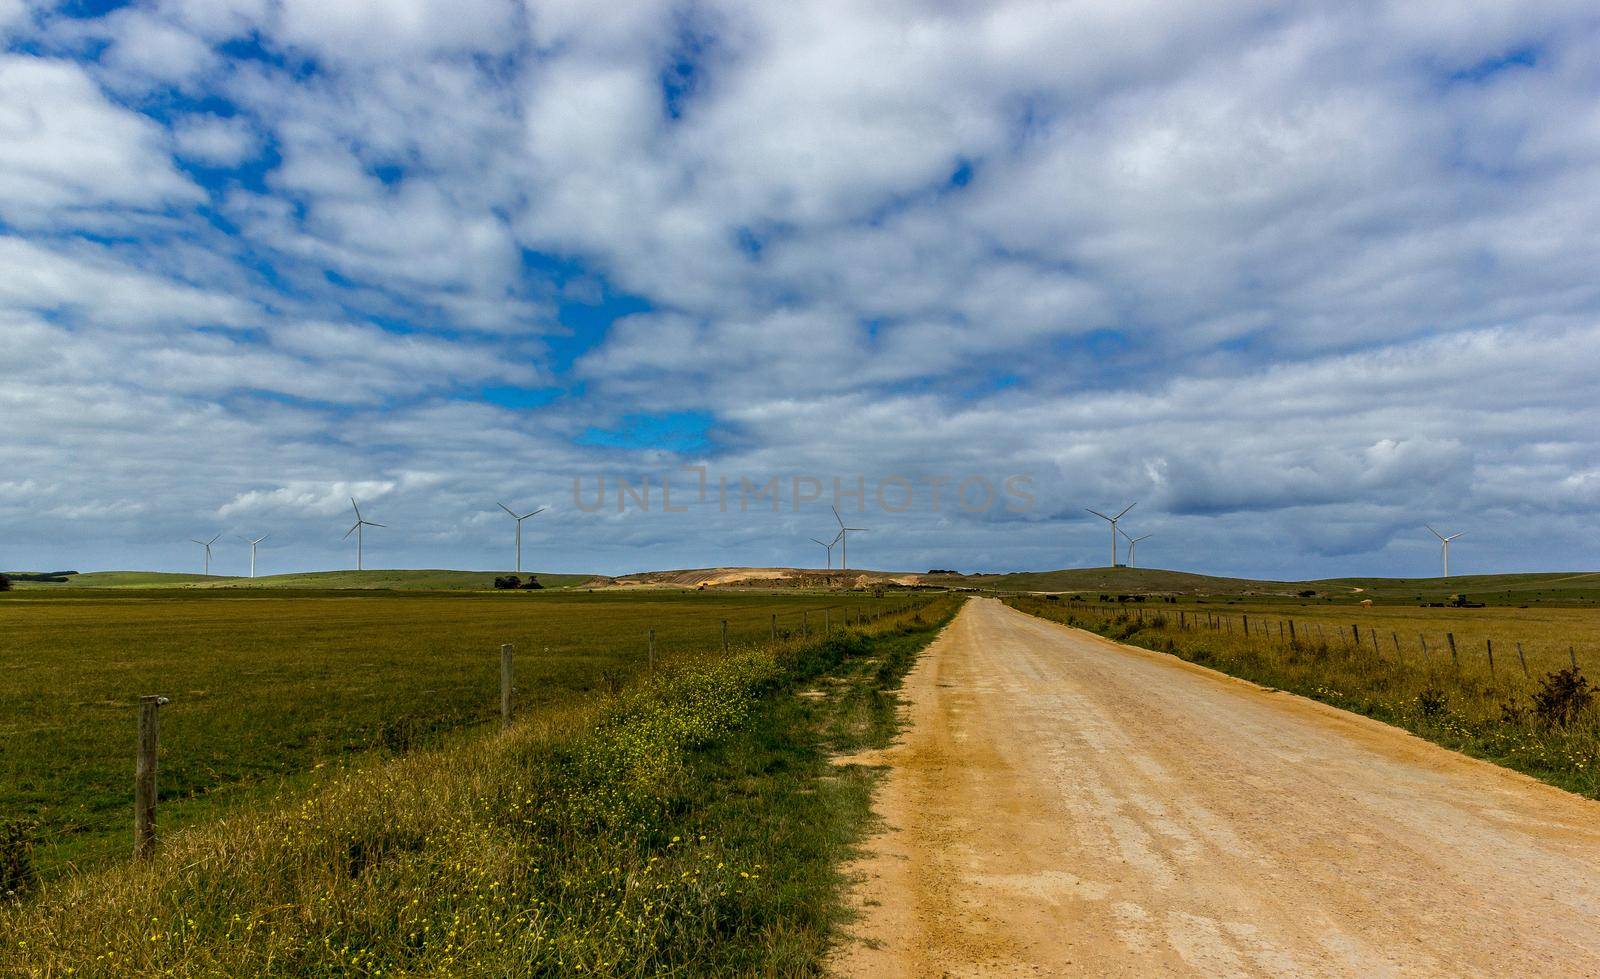 straight gravel road through to the Grampians Natioanl Park with a wind farm in the distance, New South Wales, Australia by bettercallcurry